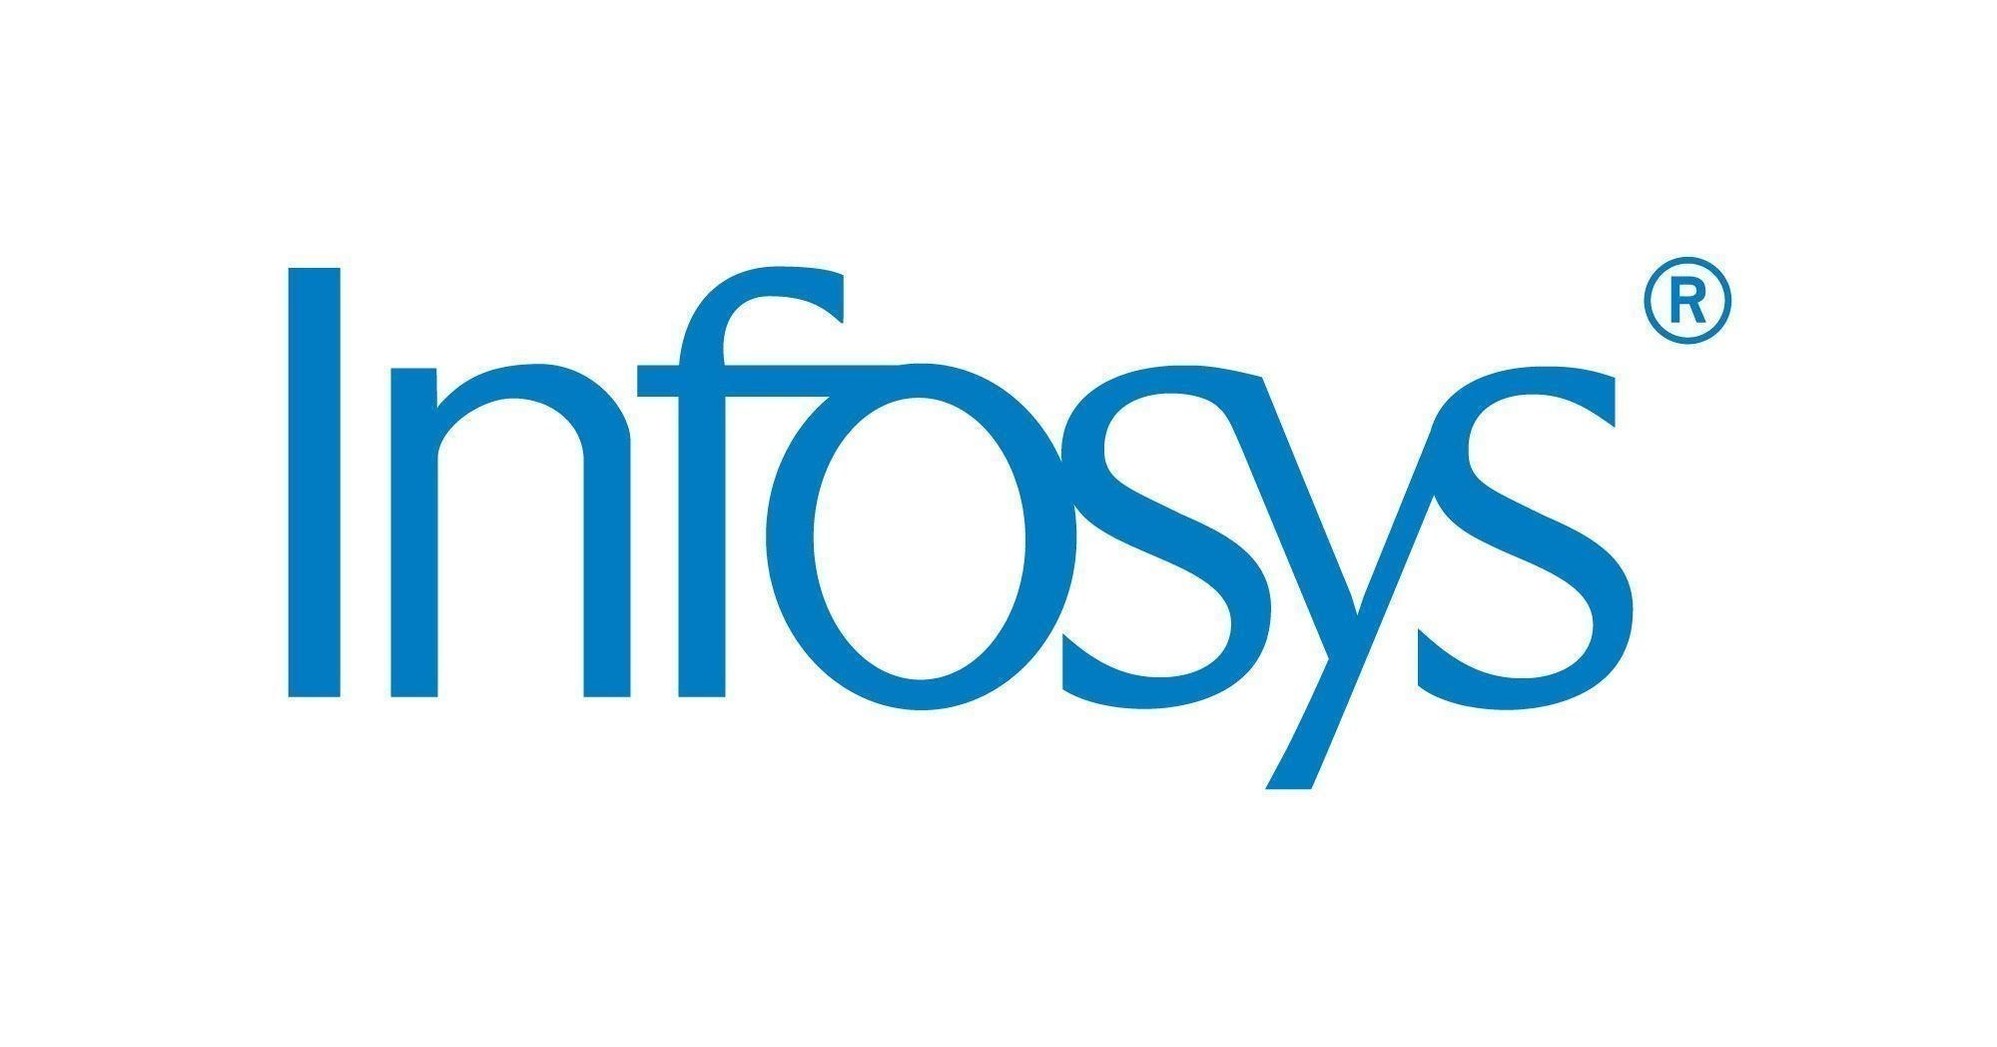 infosys ranked in the top 3 it services brands in the world; among the top 150 most valued brands